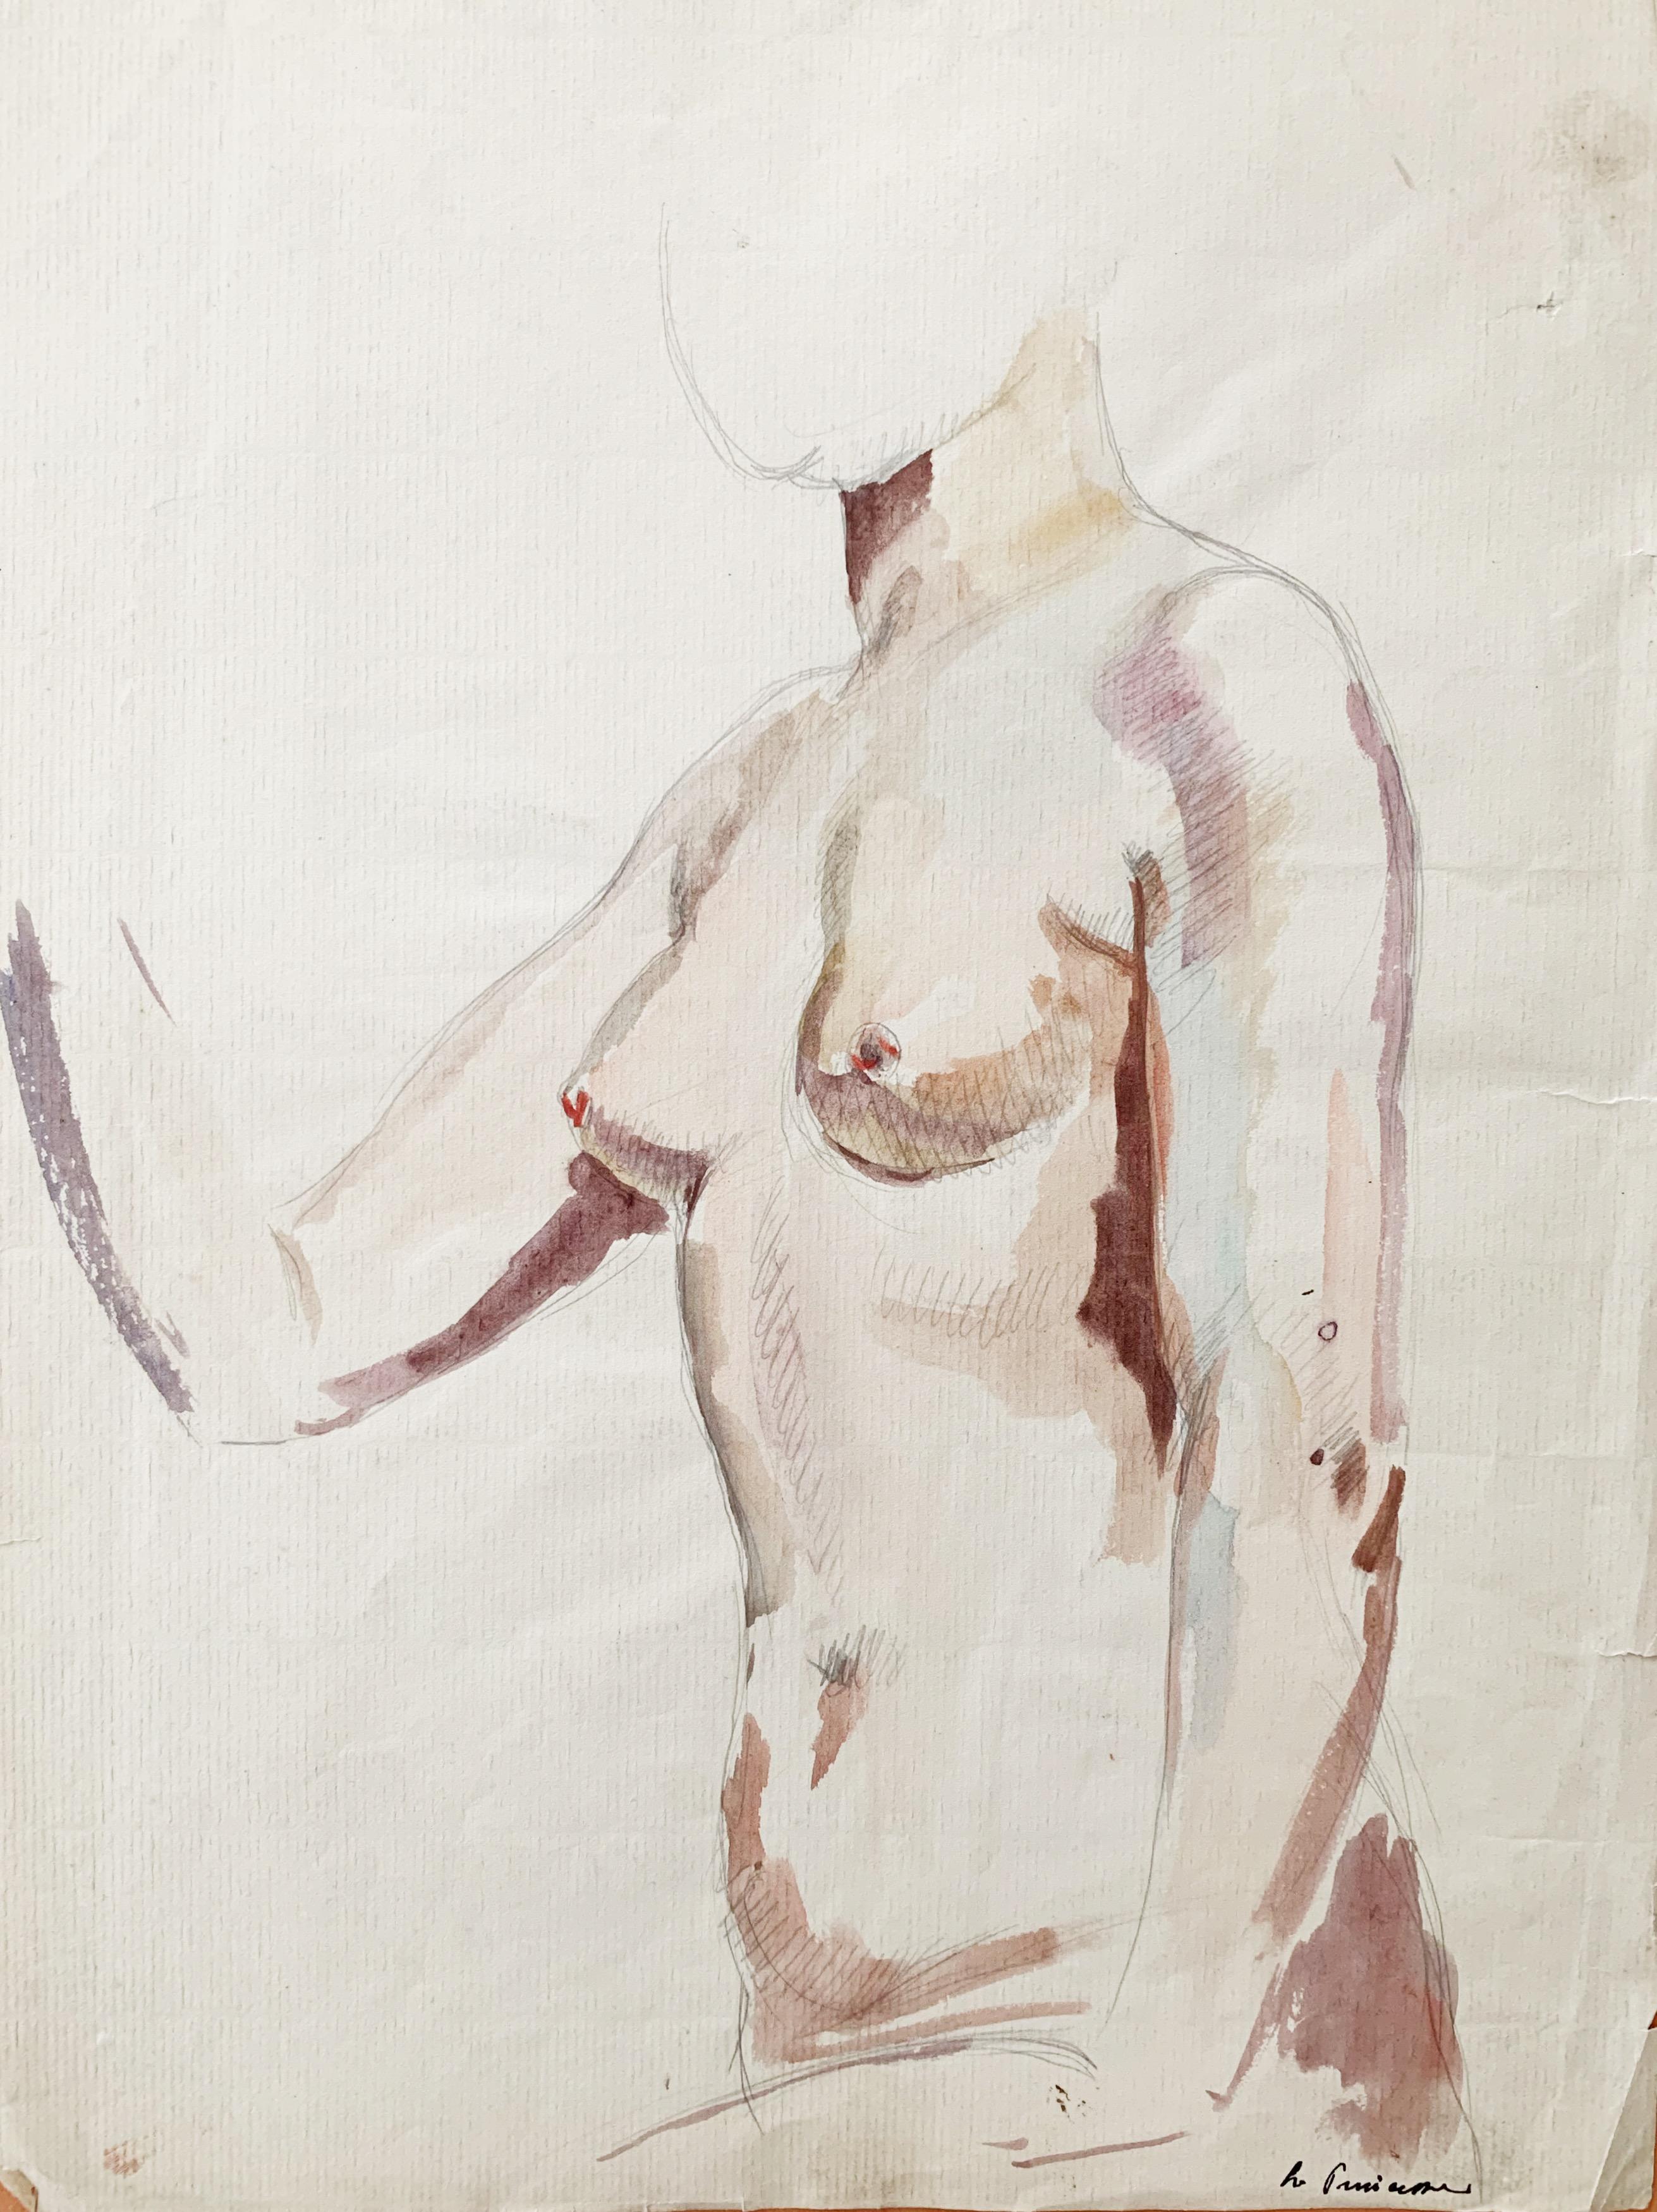 Raphaël Delorme Nude Painting - Study, preparatory work for “La Princesse”, watercolor and pencil on paper